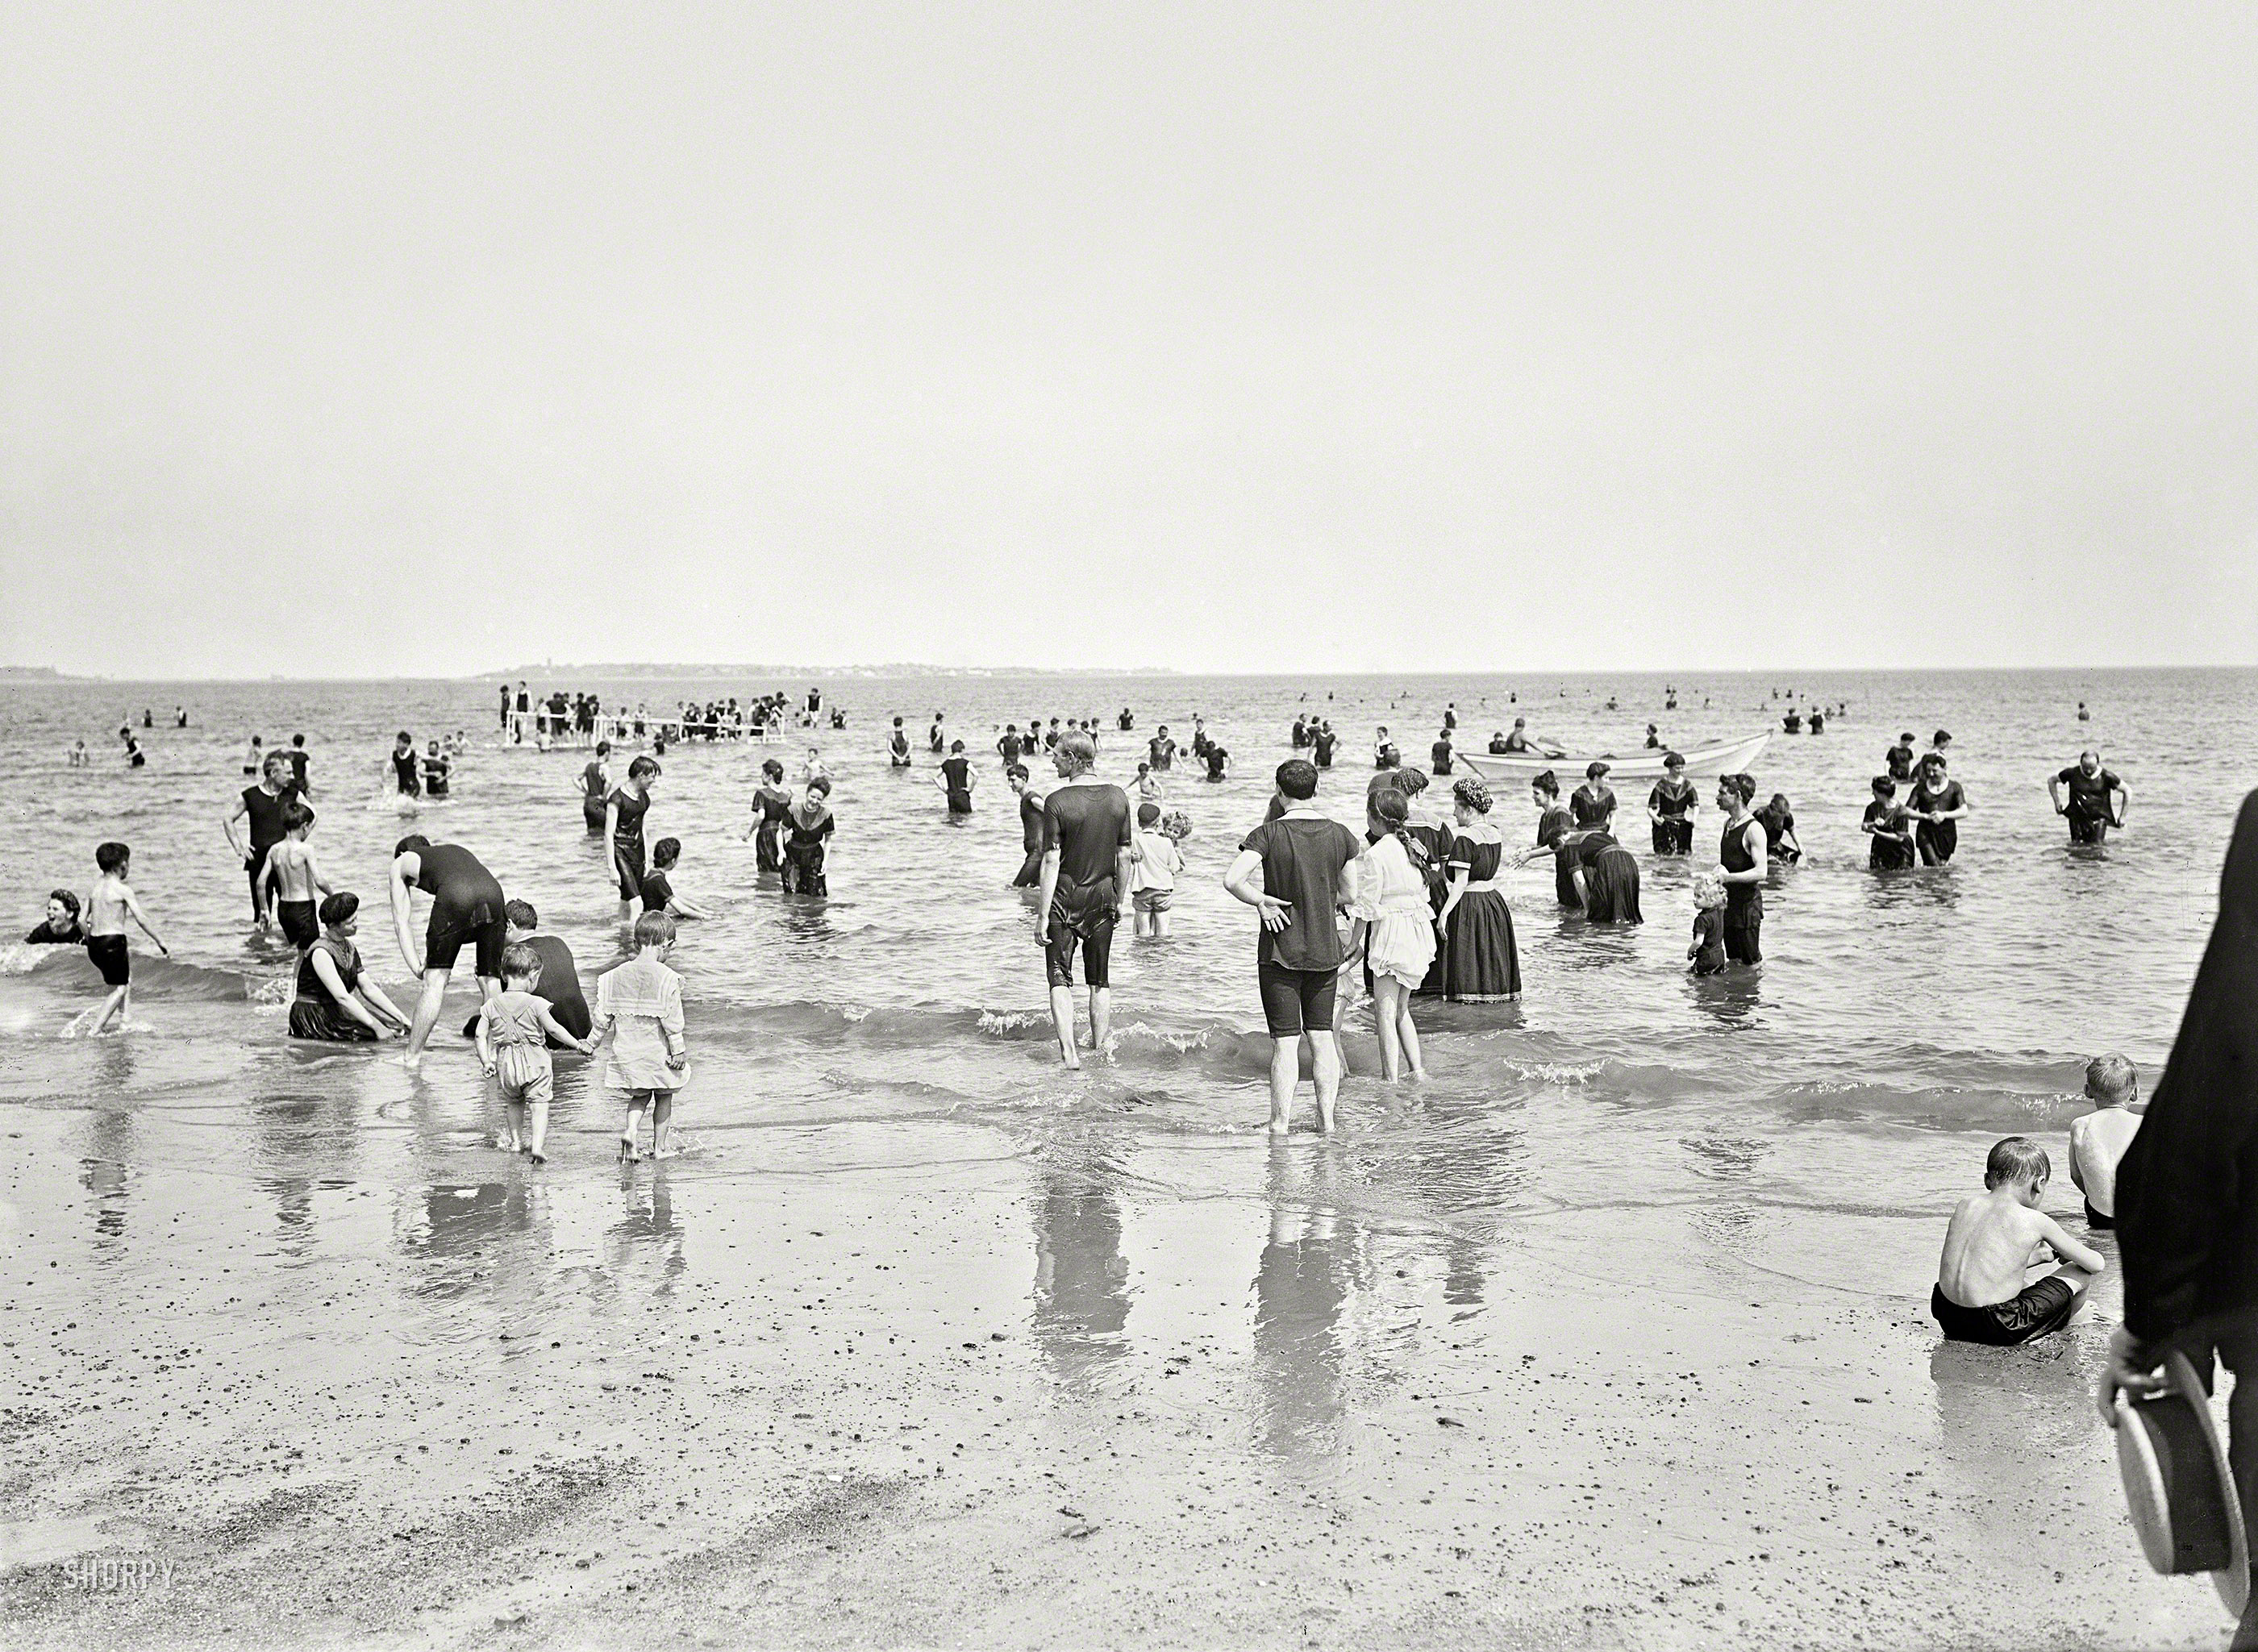 Circa 1910 surf bathers somewhere in New England. 5x7 inch dry plate glass negative, Detroit Publishing Company. View full size.